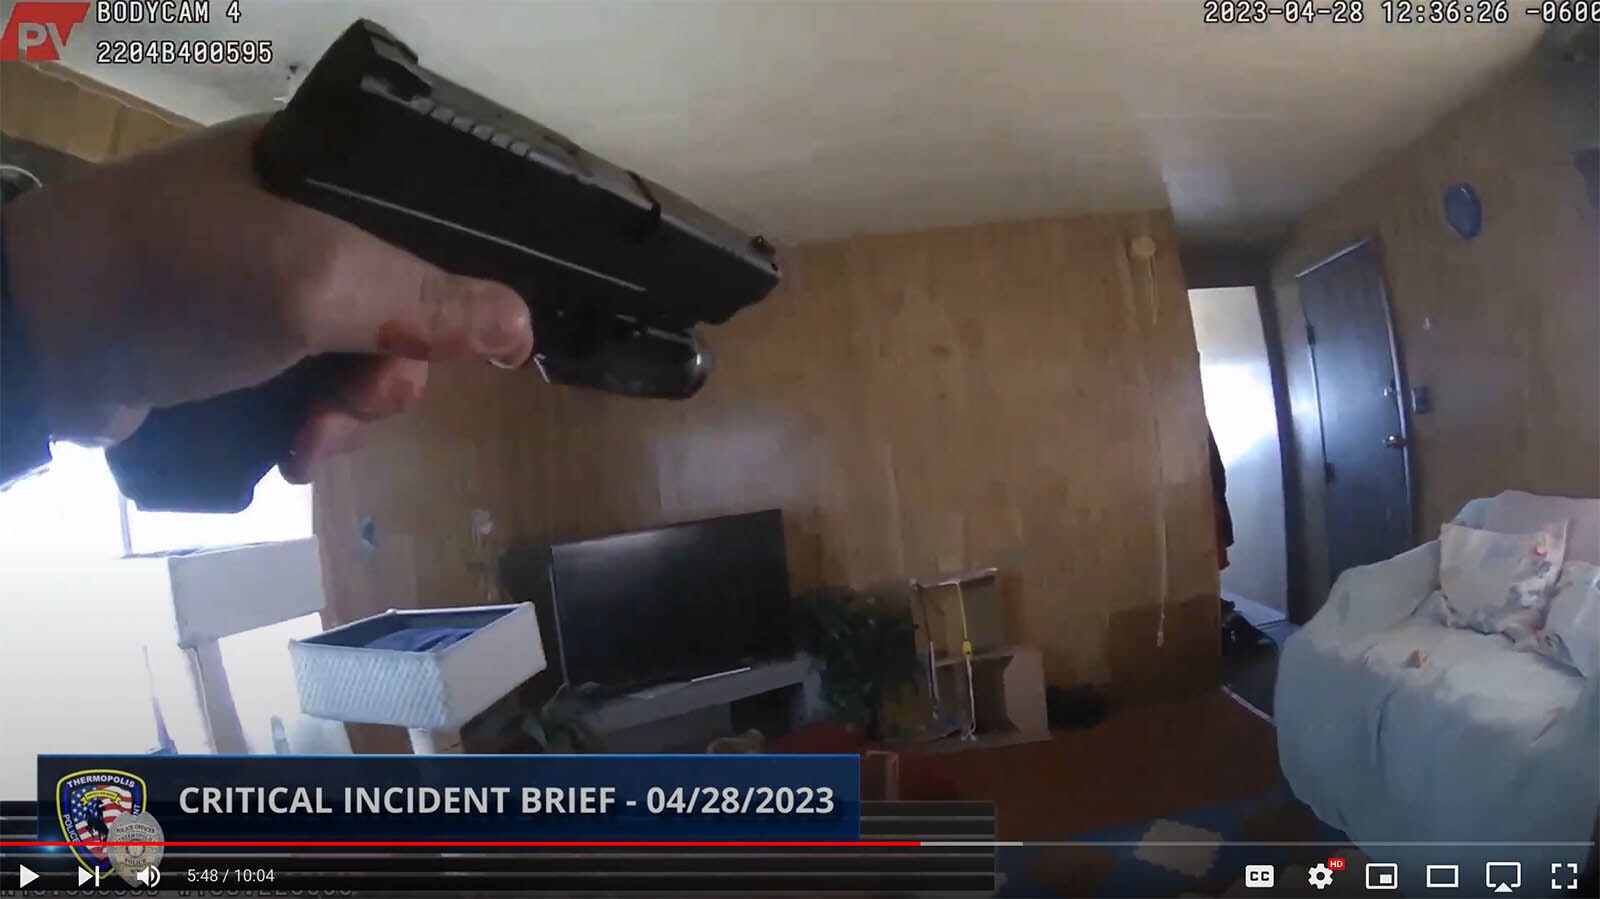 In this image from body cam video, Sgt. Mike Mascorro retreats after being shot by Buck Laramore on April 28, 2023.